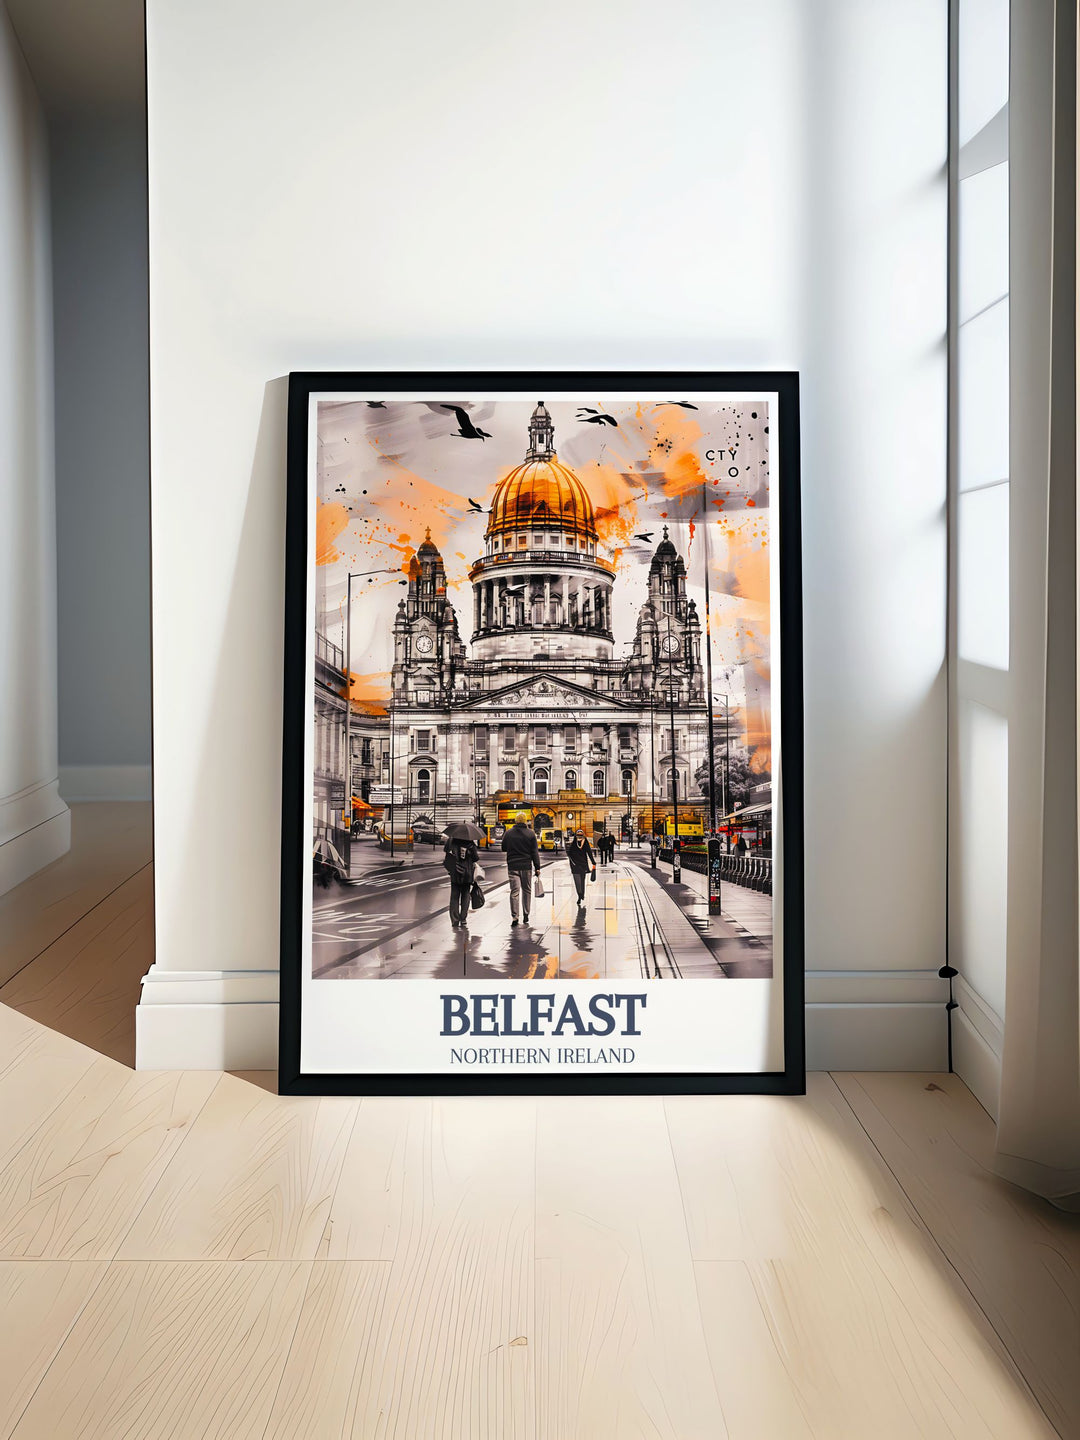 Beautiful City Hall Donegall Square travel poster showcasing the iconic Belfast landmark surrounded by the vibrant life of Donegall Square. Perfect Ireland wall art for adding a touch of UK art to your home decor or as a unique Belfast city gift.